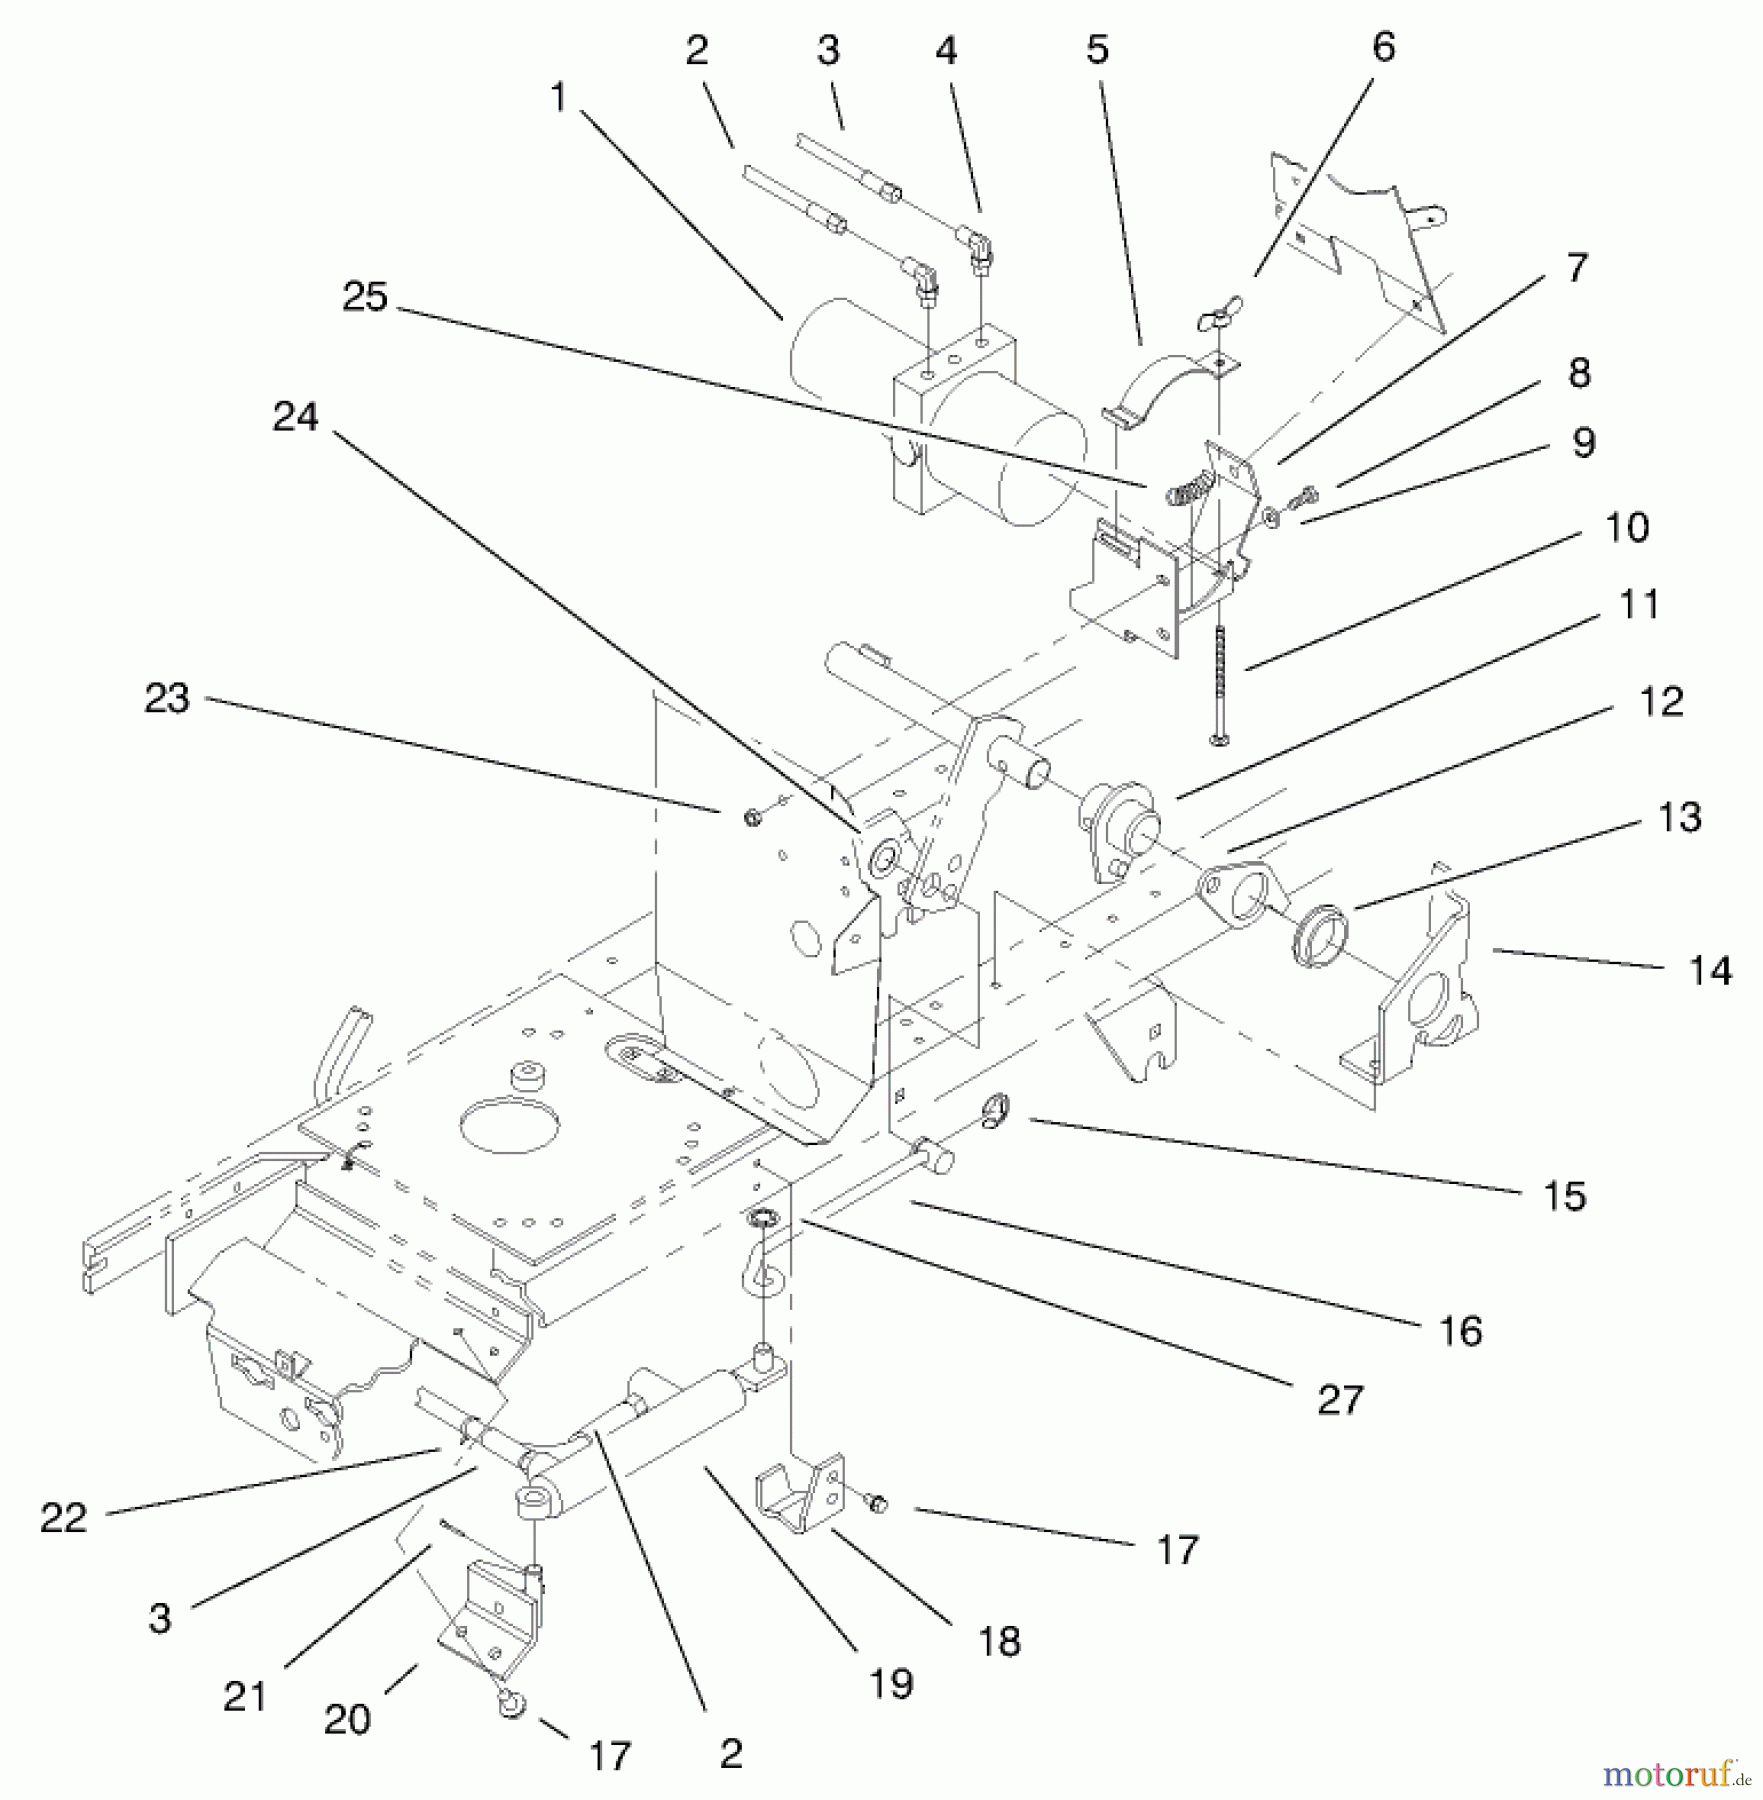  Toro Neu Mowers, Lawn & Garden Tractor Seite 1 72115 (270-H) - Toro 270-H Lawn and Garden Tractor, 1999 (9900001-9999999) POWER LIFT ASSEMBLY